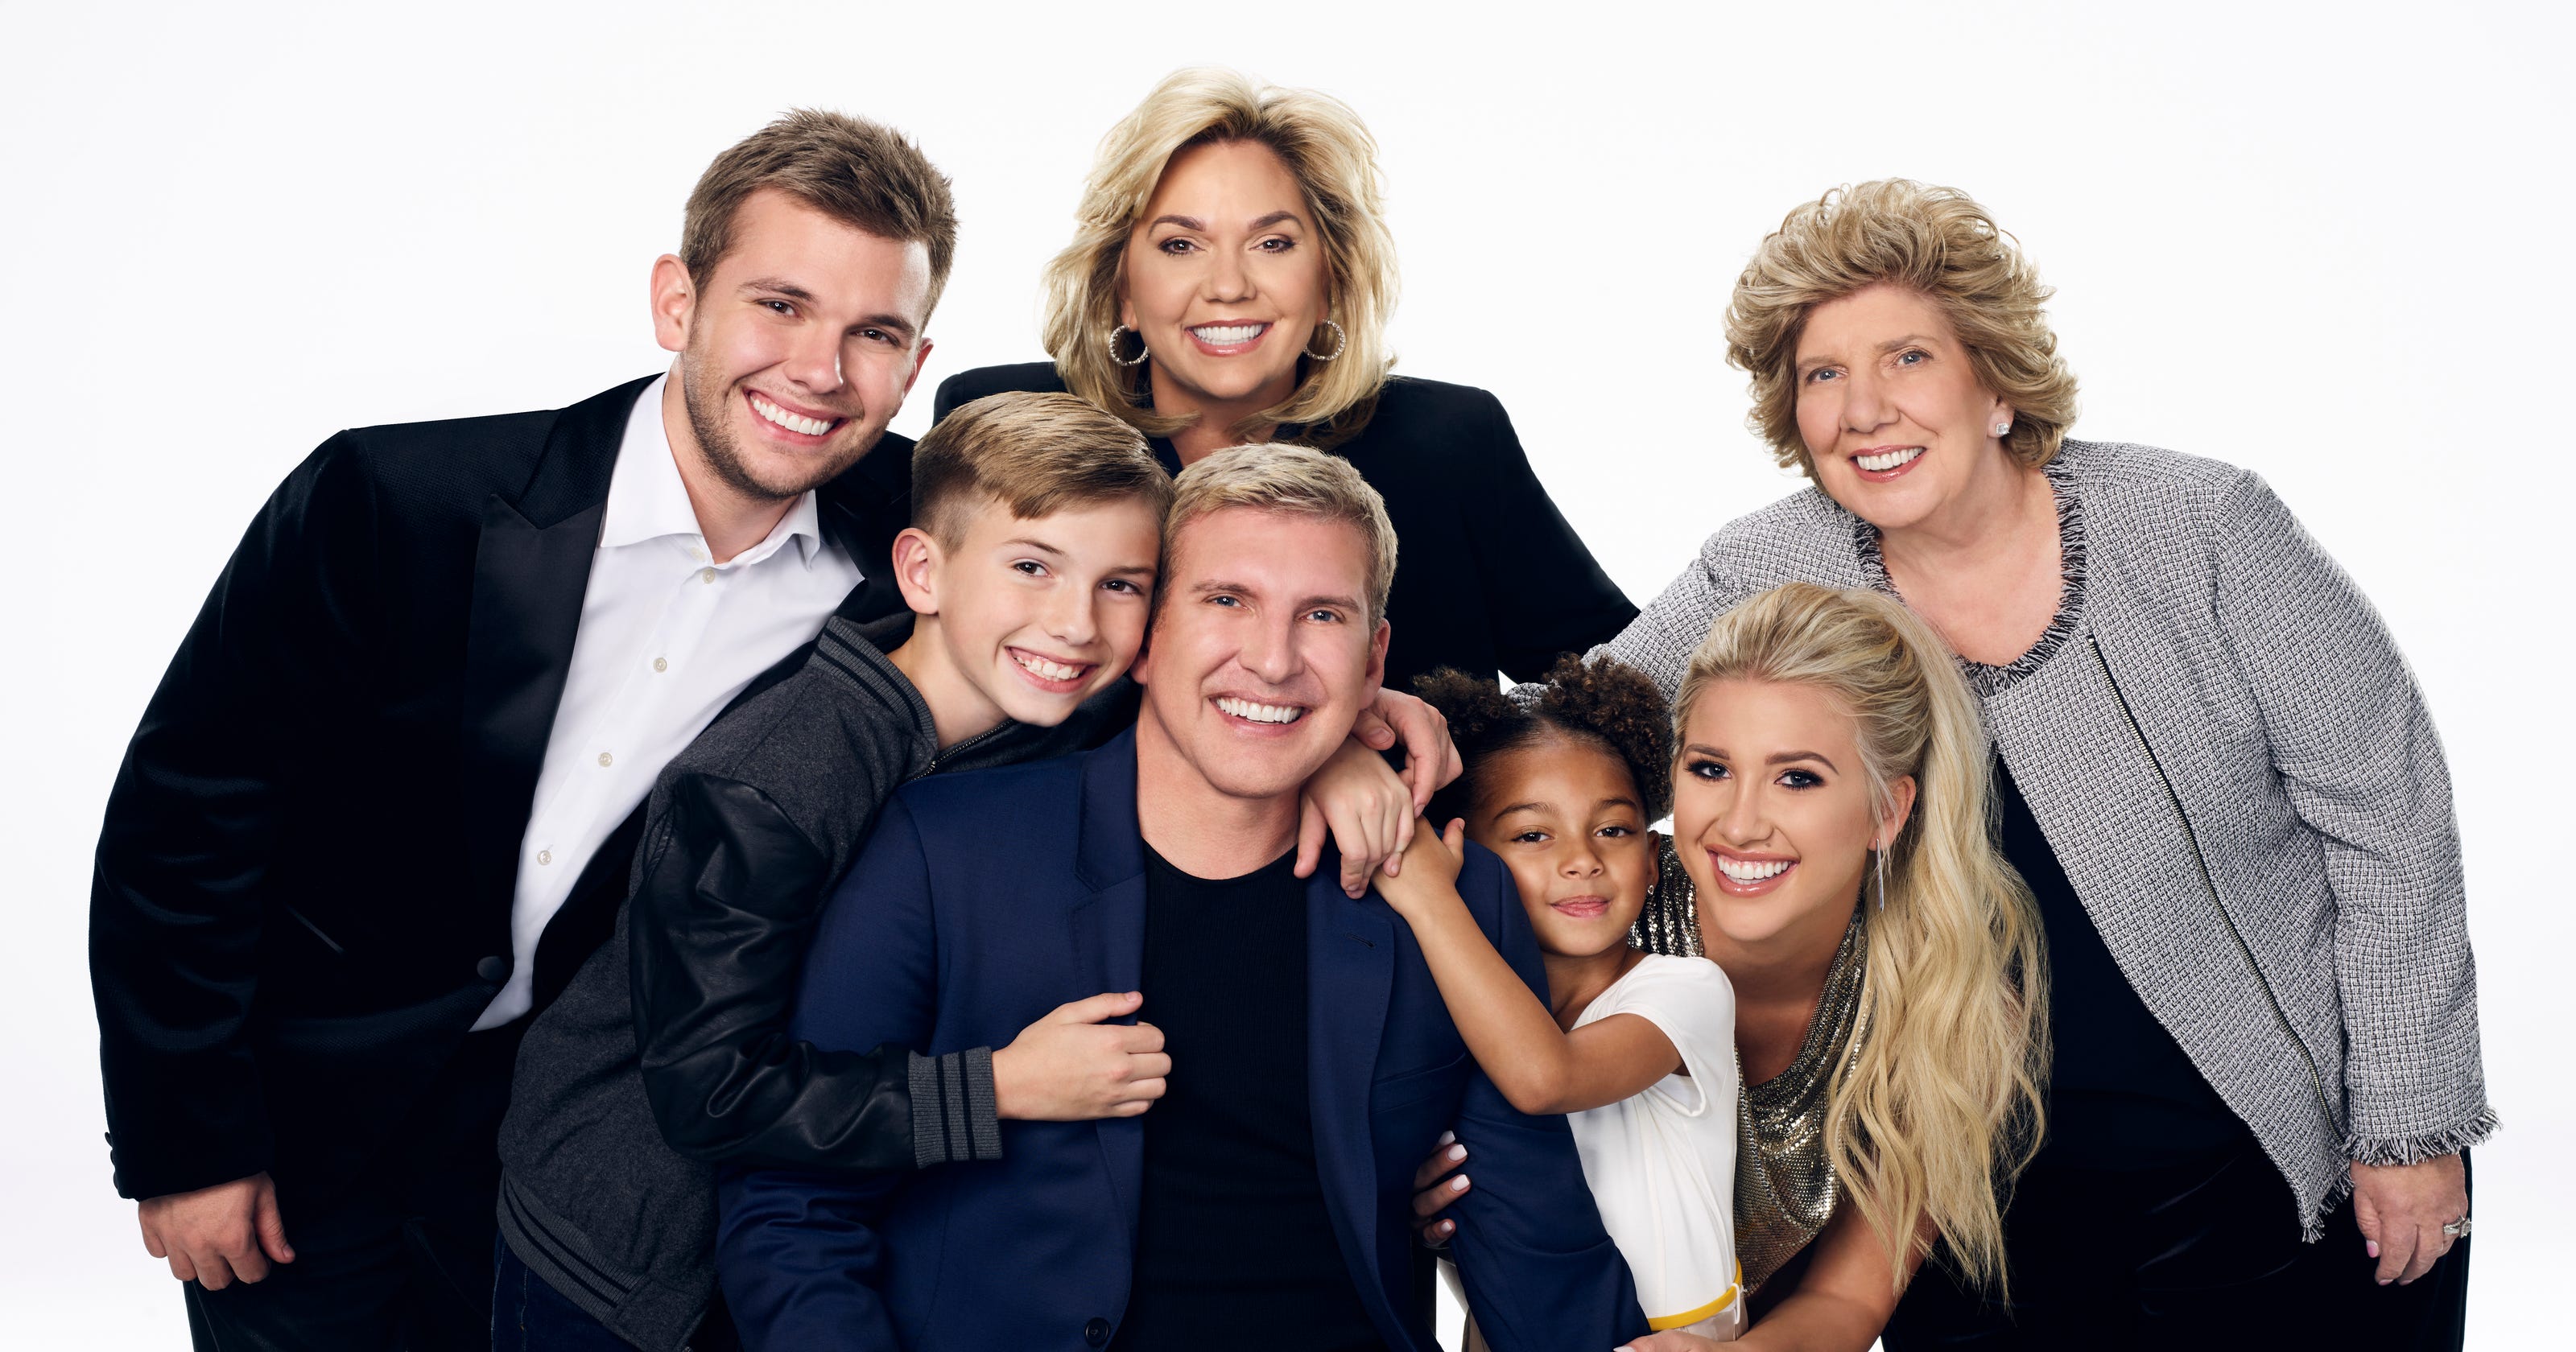 Chrisley tax evasion indictment: TV stars enter not-guilty plea in Georgia